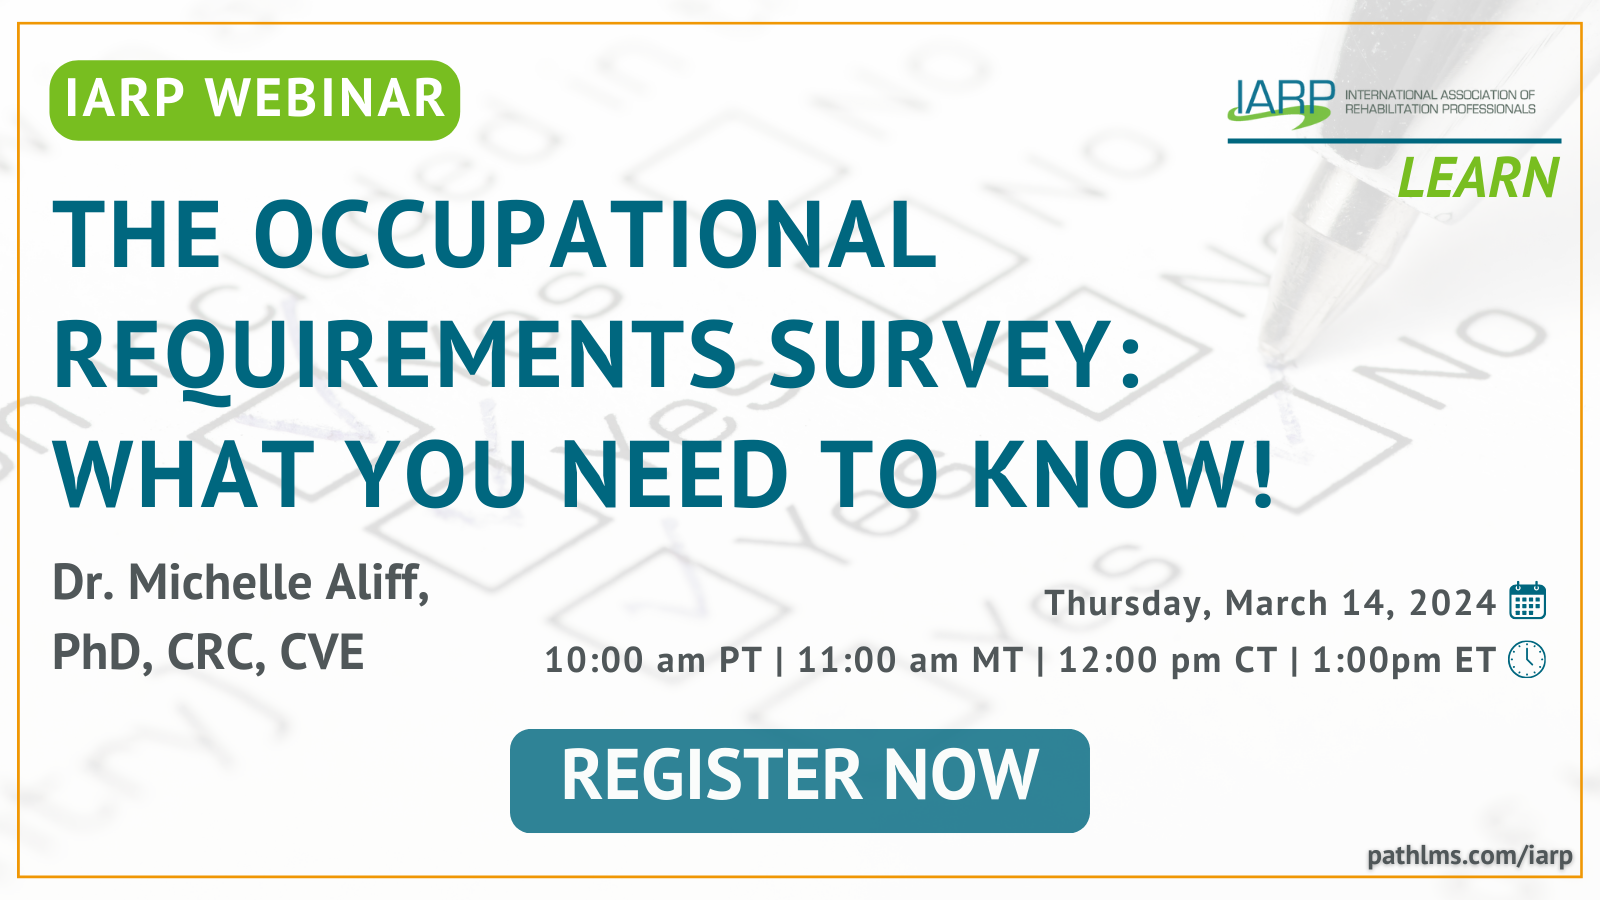 Upcoming Webinar: The Occupational Requirements Survey: What you need to know!